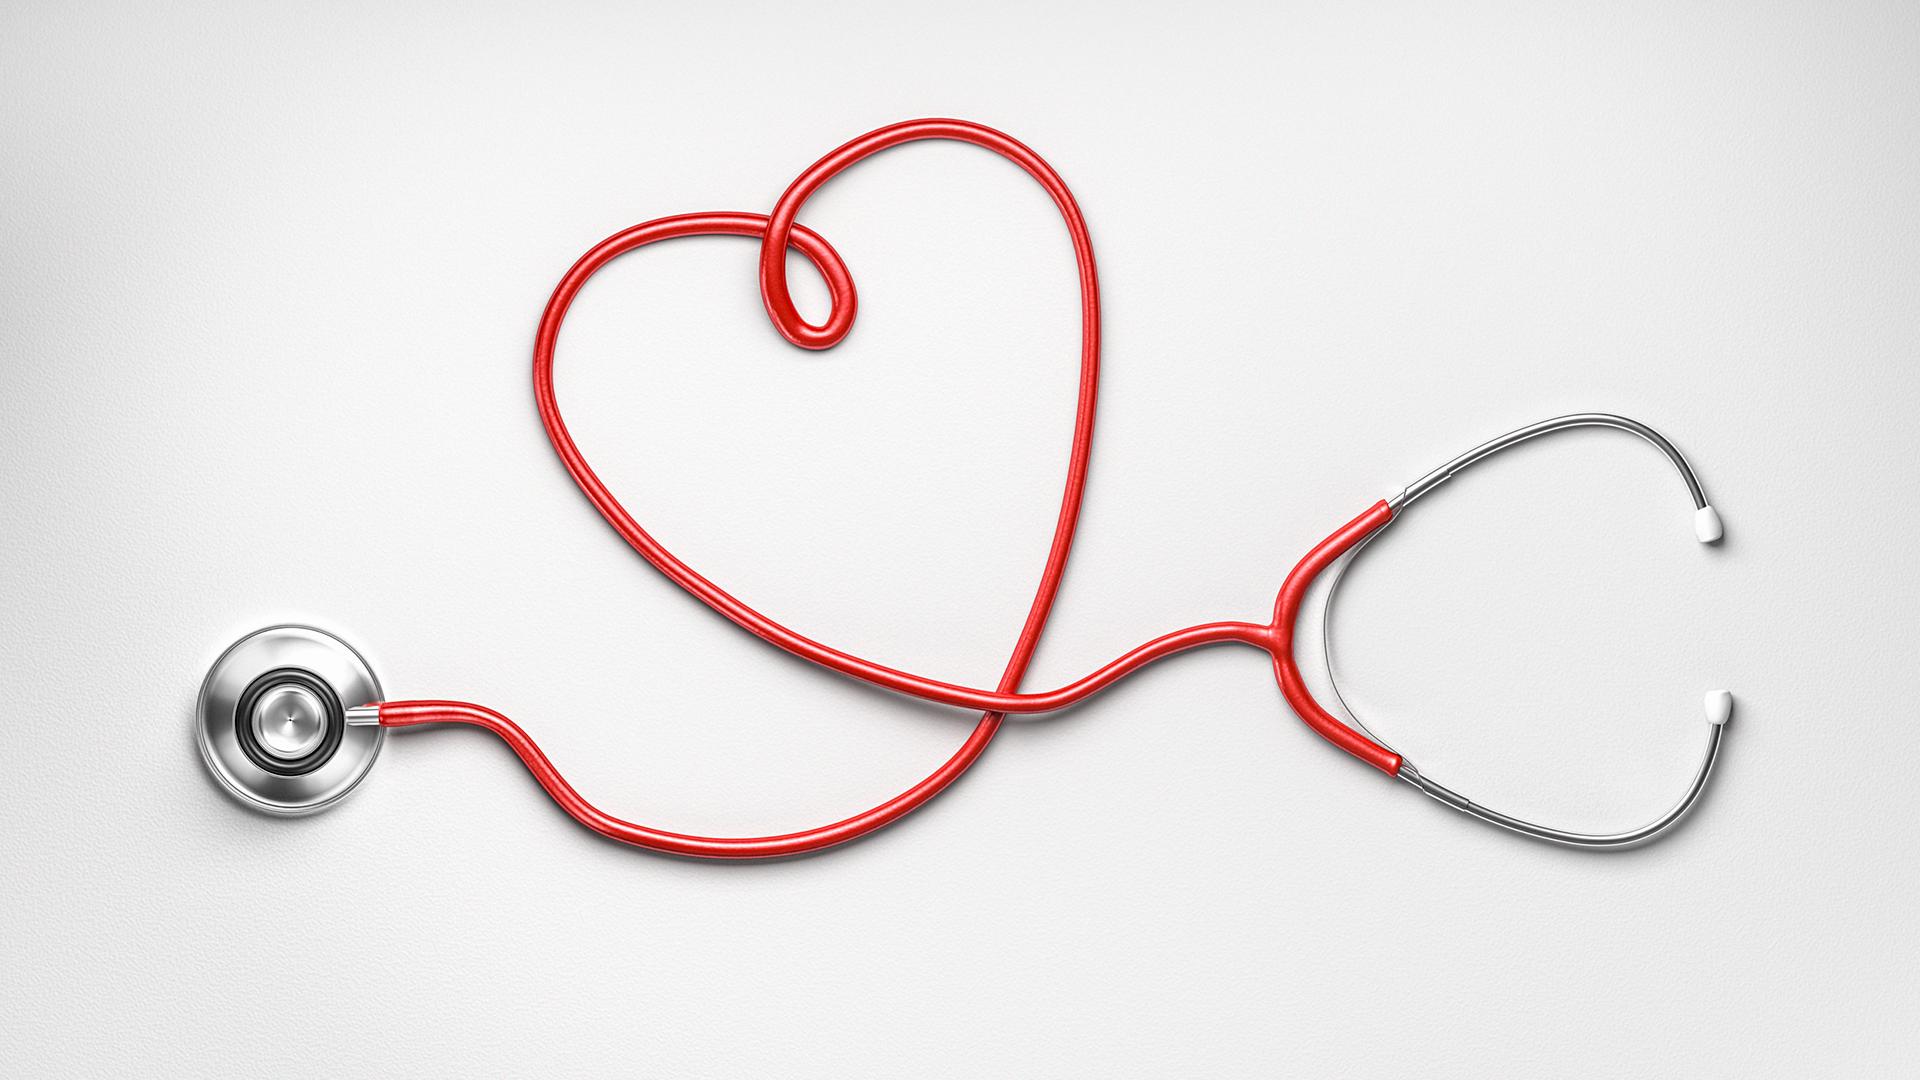 A stethoscope on a white background with the red cable making a heart shape in the centre